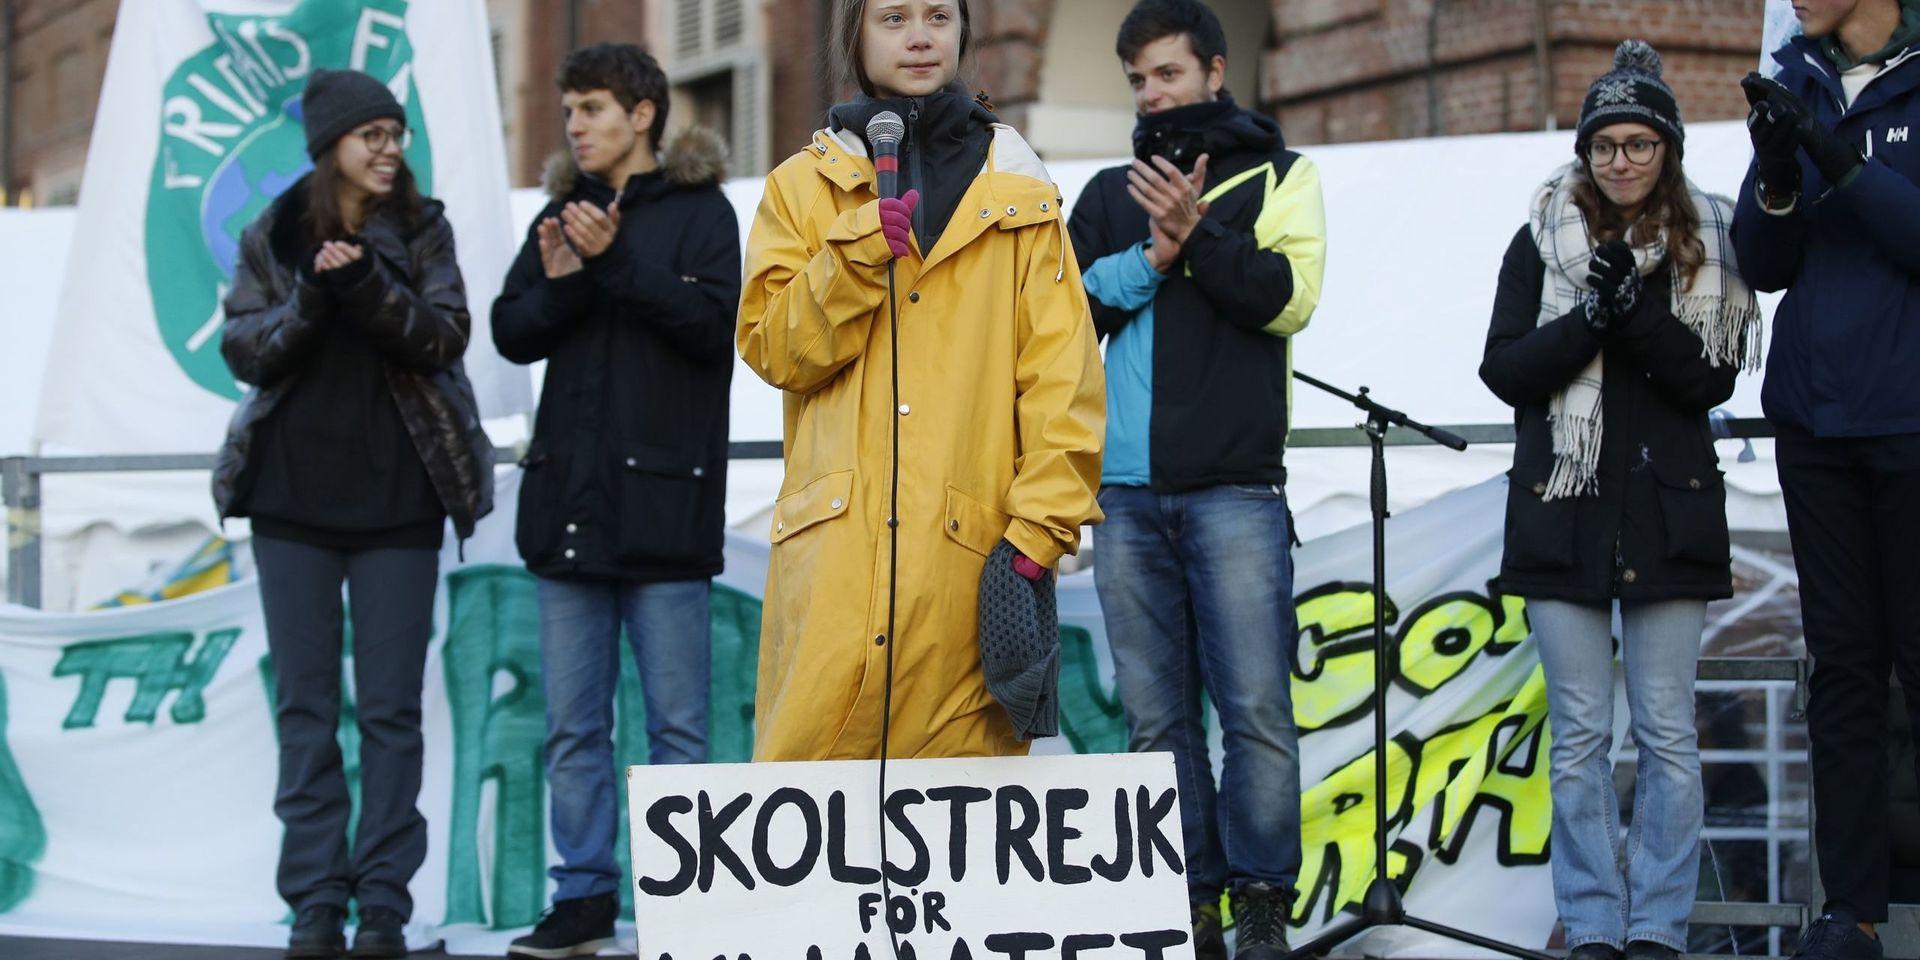 Swedish environmental activist Greta Thunberg attends a climate march, in Turin, Italy, Friday. Dec. 13, 2019. Thunberg was named this week Time&apos;s Person of the Year, despite becoming the figurehead of a global youth movement pressing governments for faster action on climate change. Writing on sign at her feet reads in Swedish &quot;School strike for the climate.&quot; (AP Photo/Antonio Calanni)  XBL101